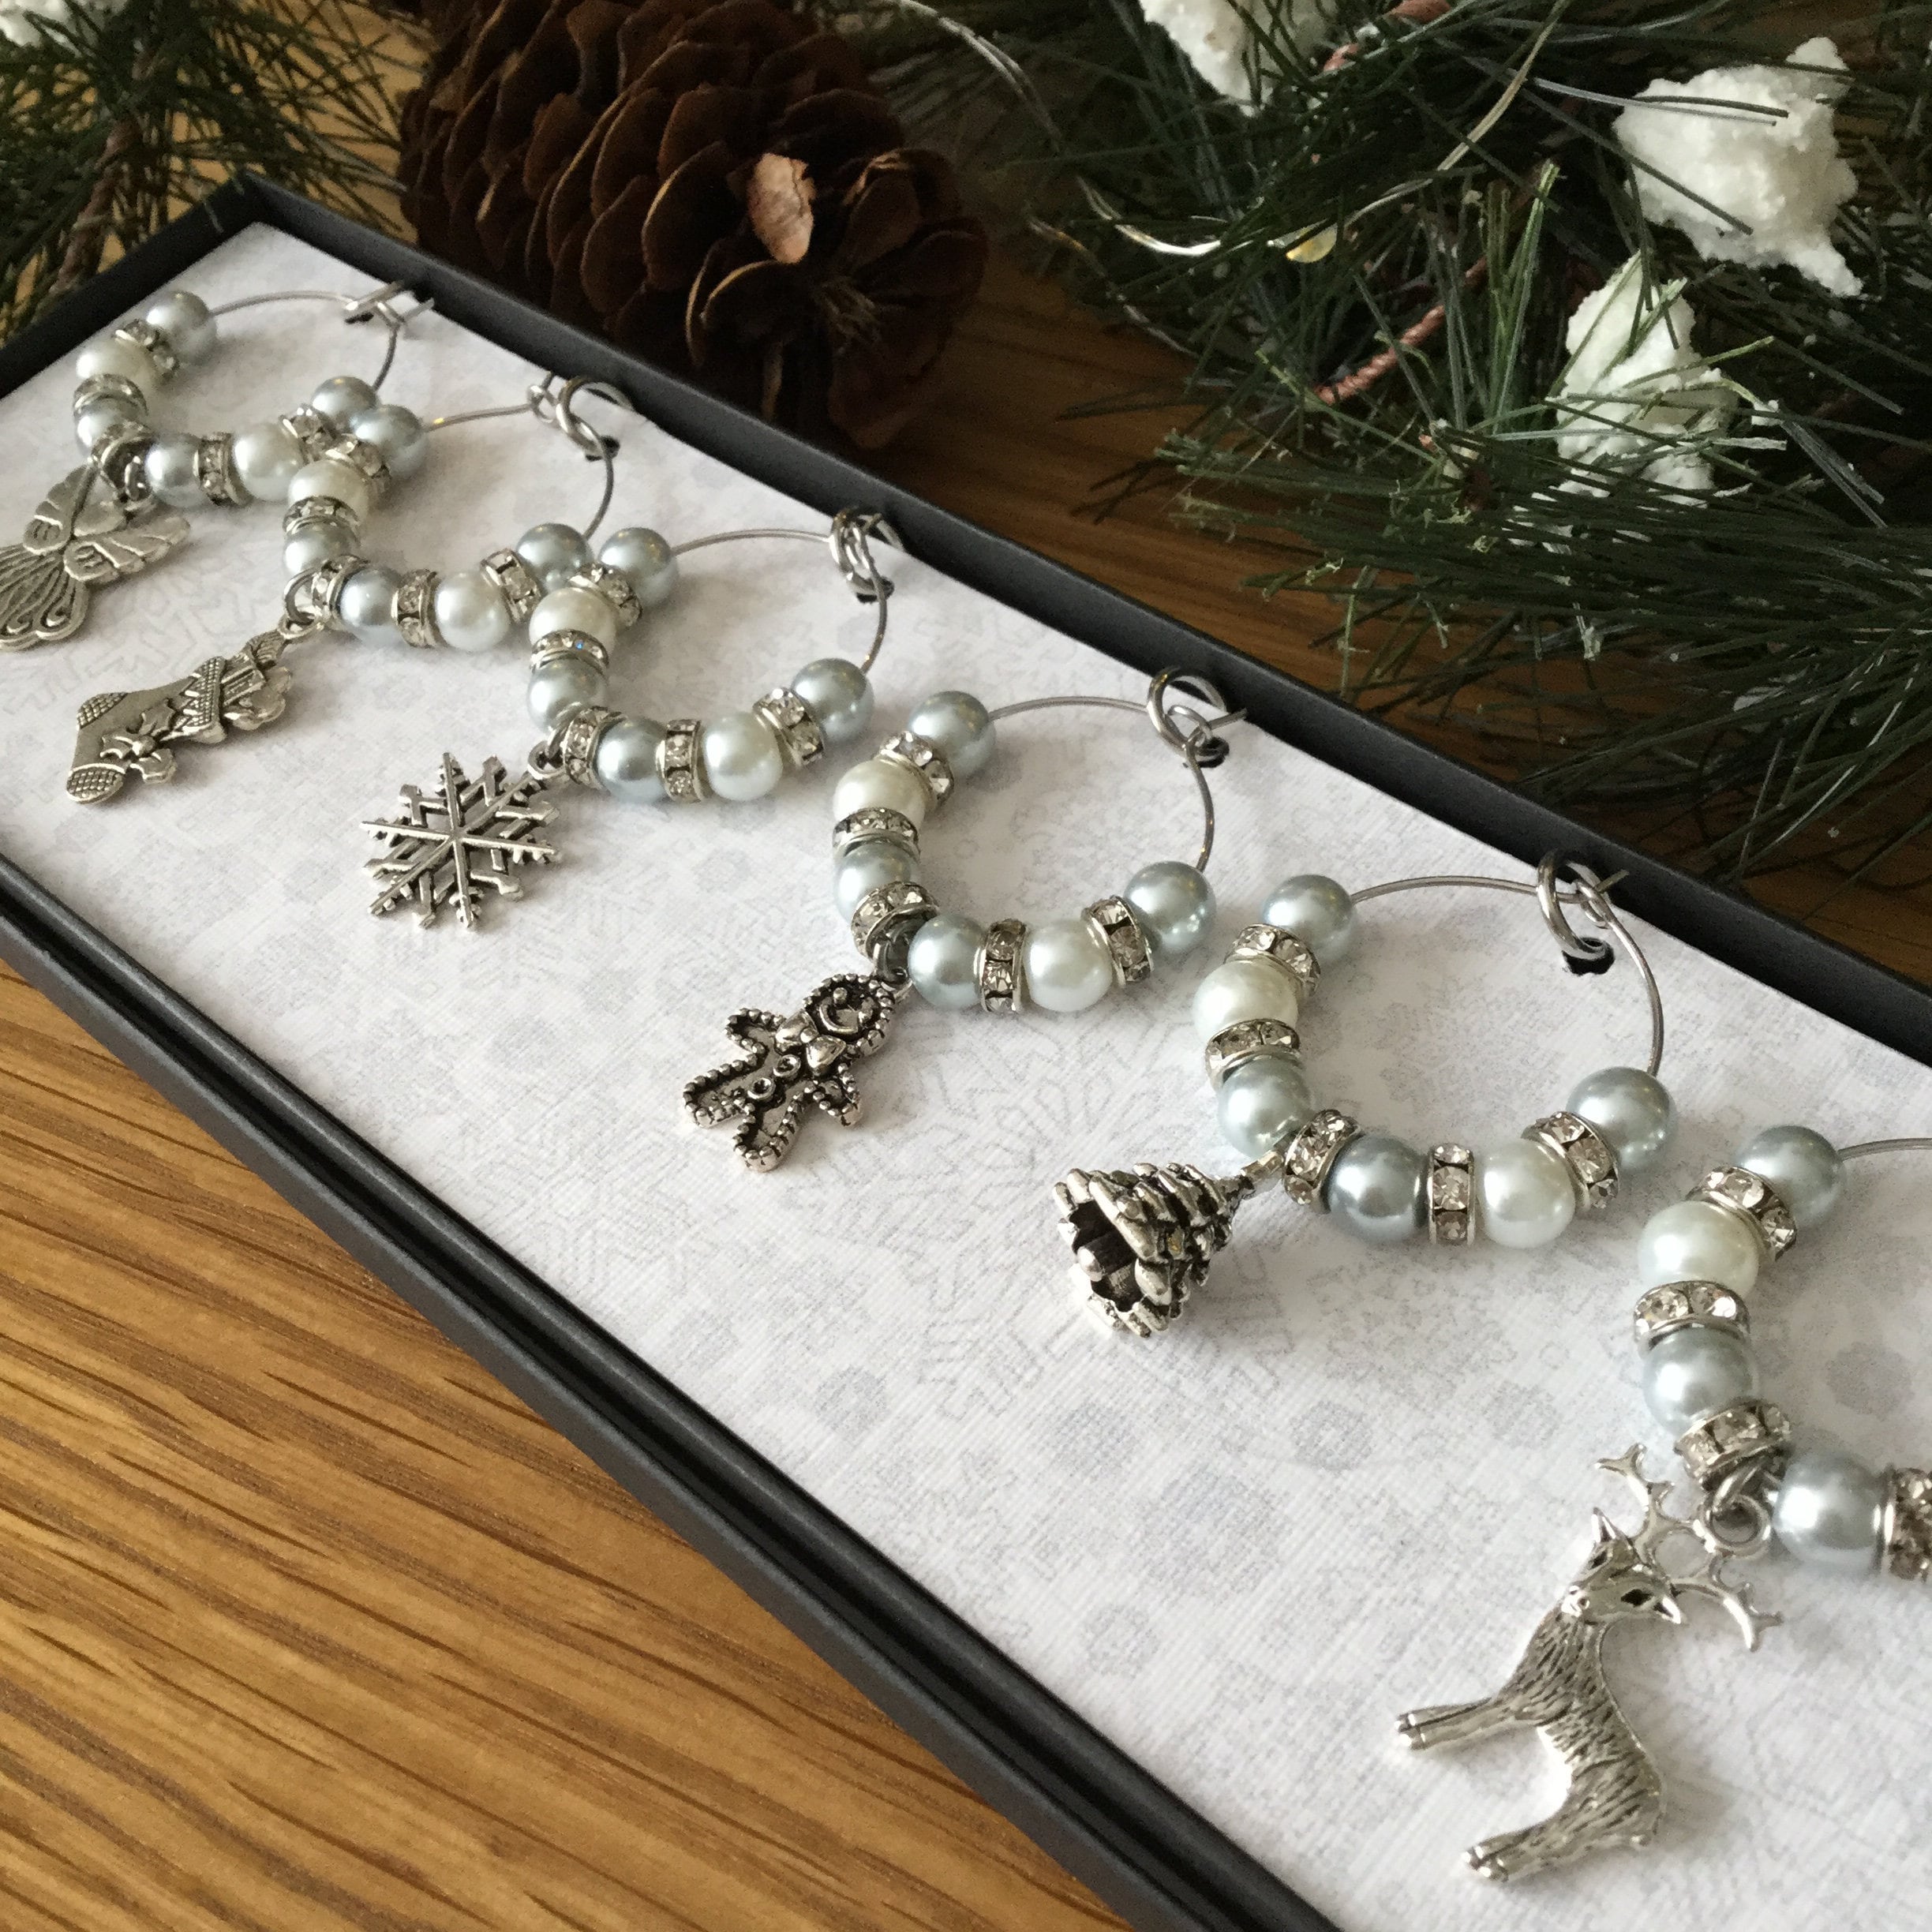 Christmas Wine Charms -  Norway